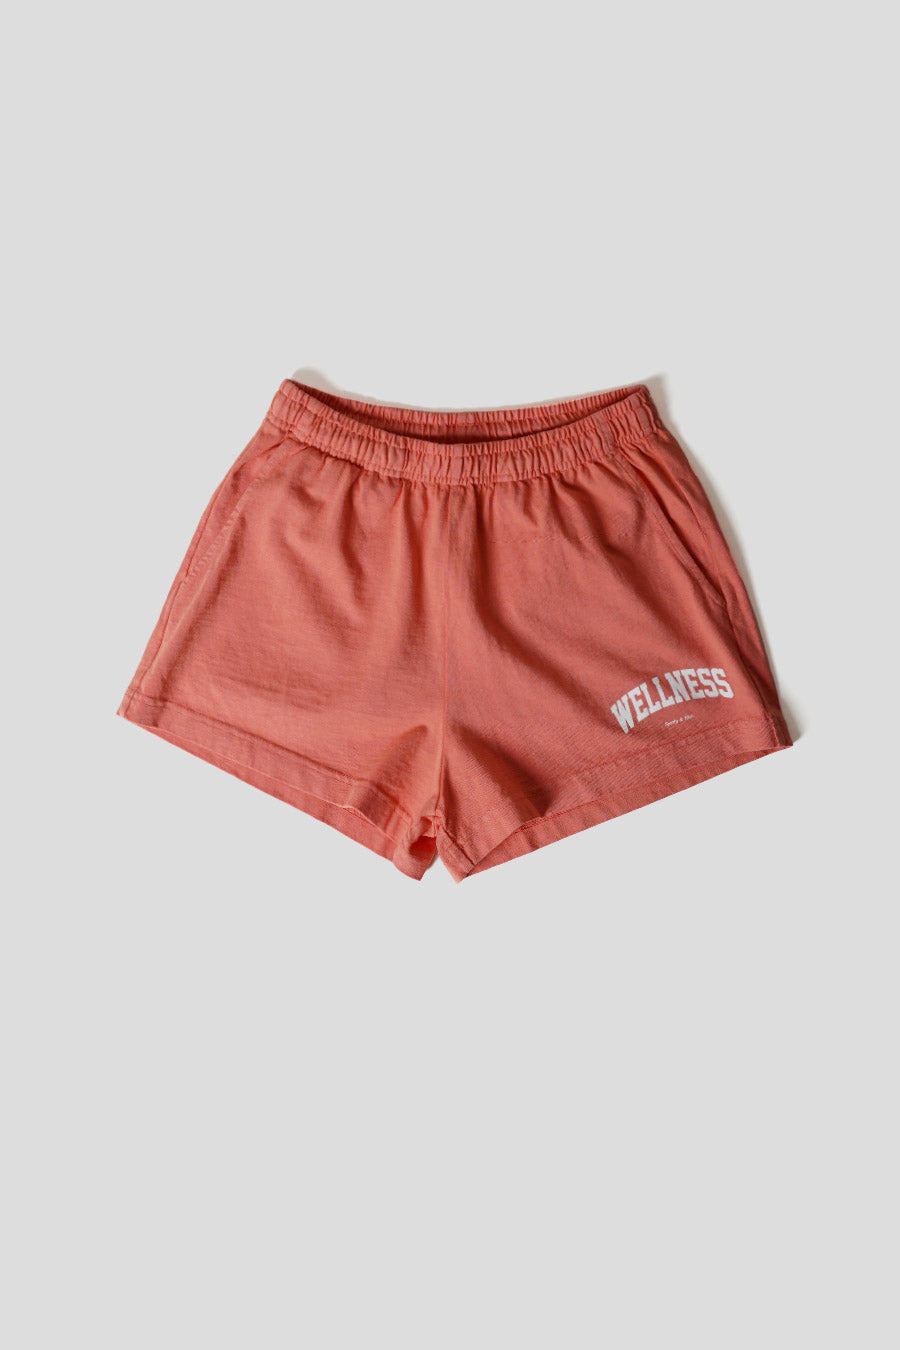 Sporty & Rich - IVY DISCO SALMON PINK WELLNESS SHORTS - LE LABO STORE